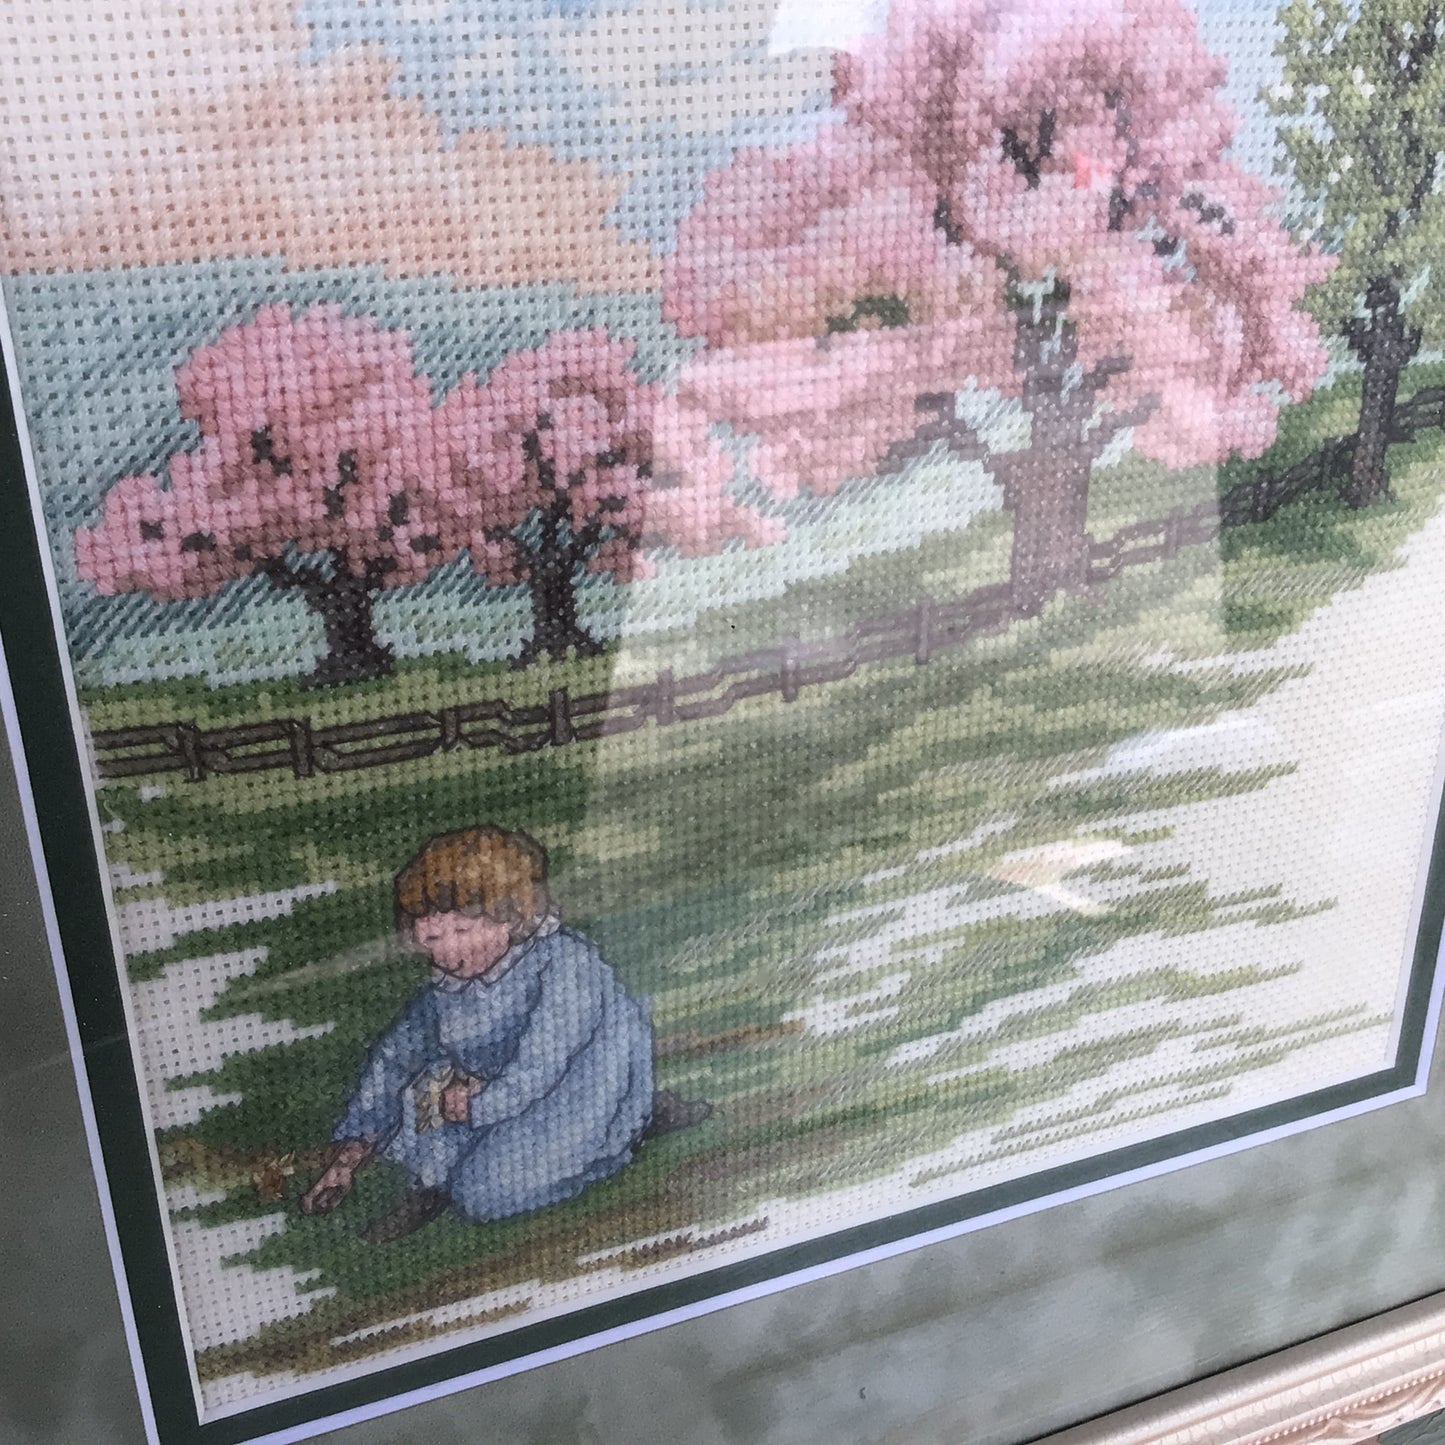 Framed and Matted “ Child in the Meadow” Cross-stitch